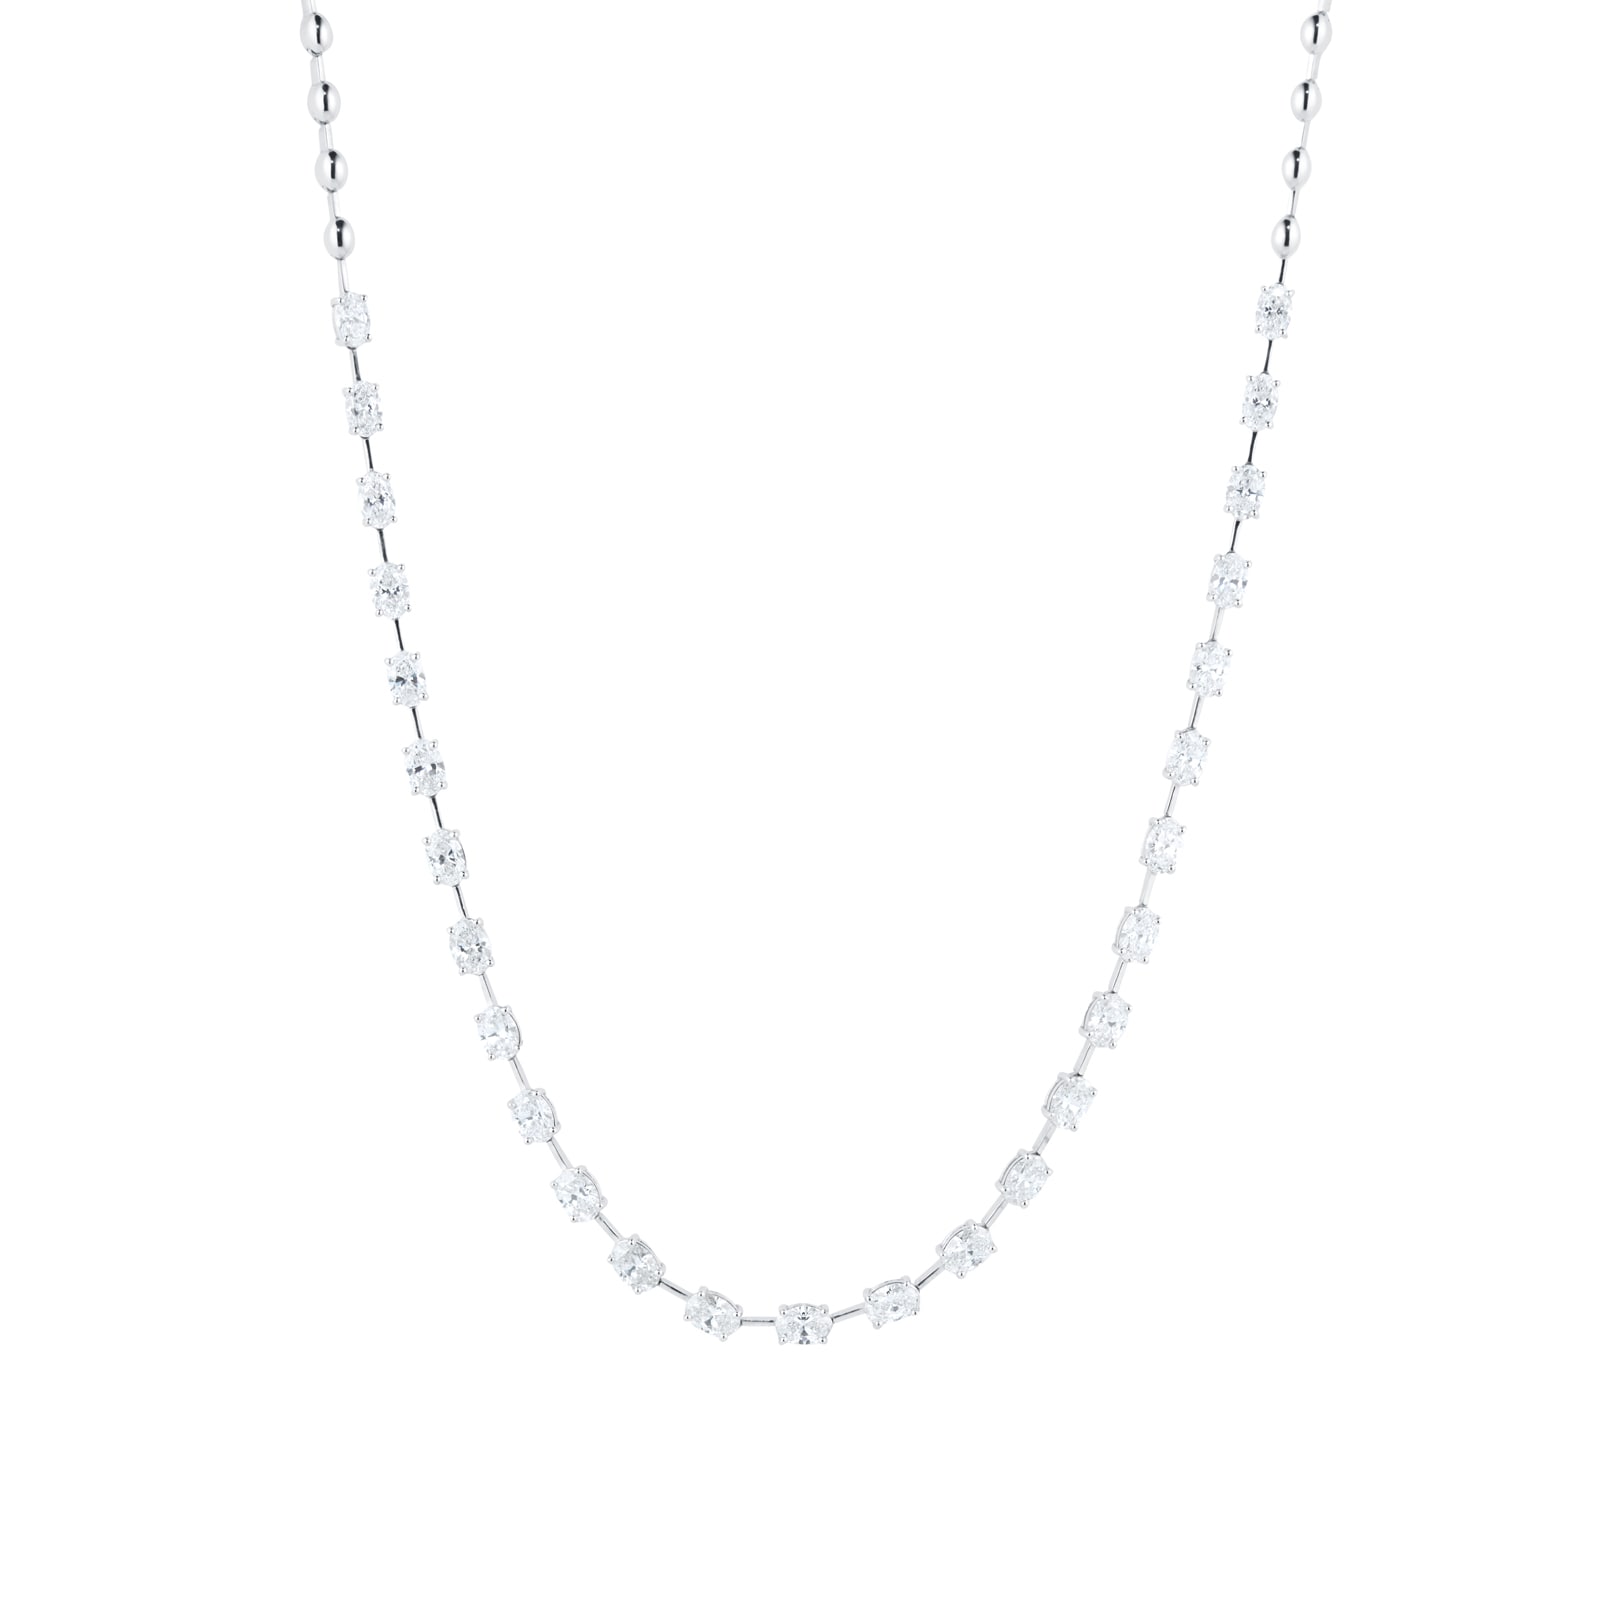 18ct White Gold 6.9cttw Oval Cut Diamond Necklace